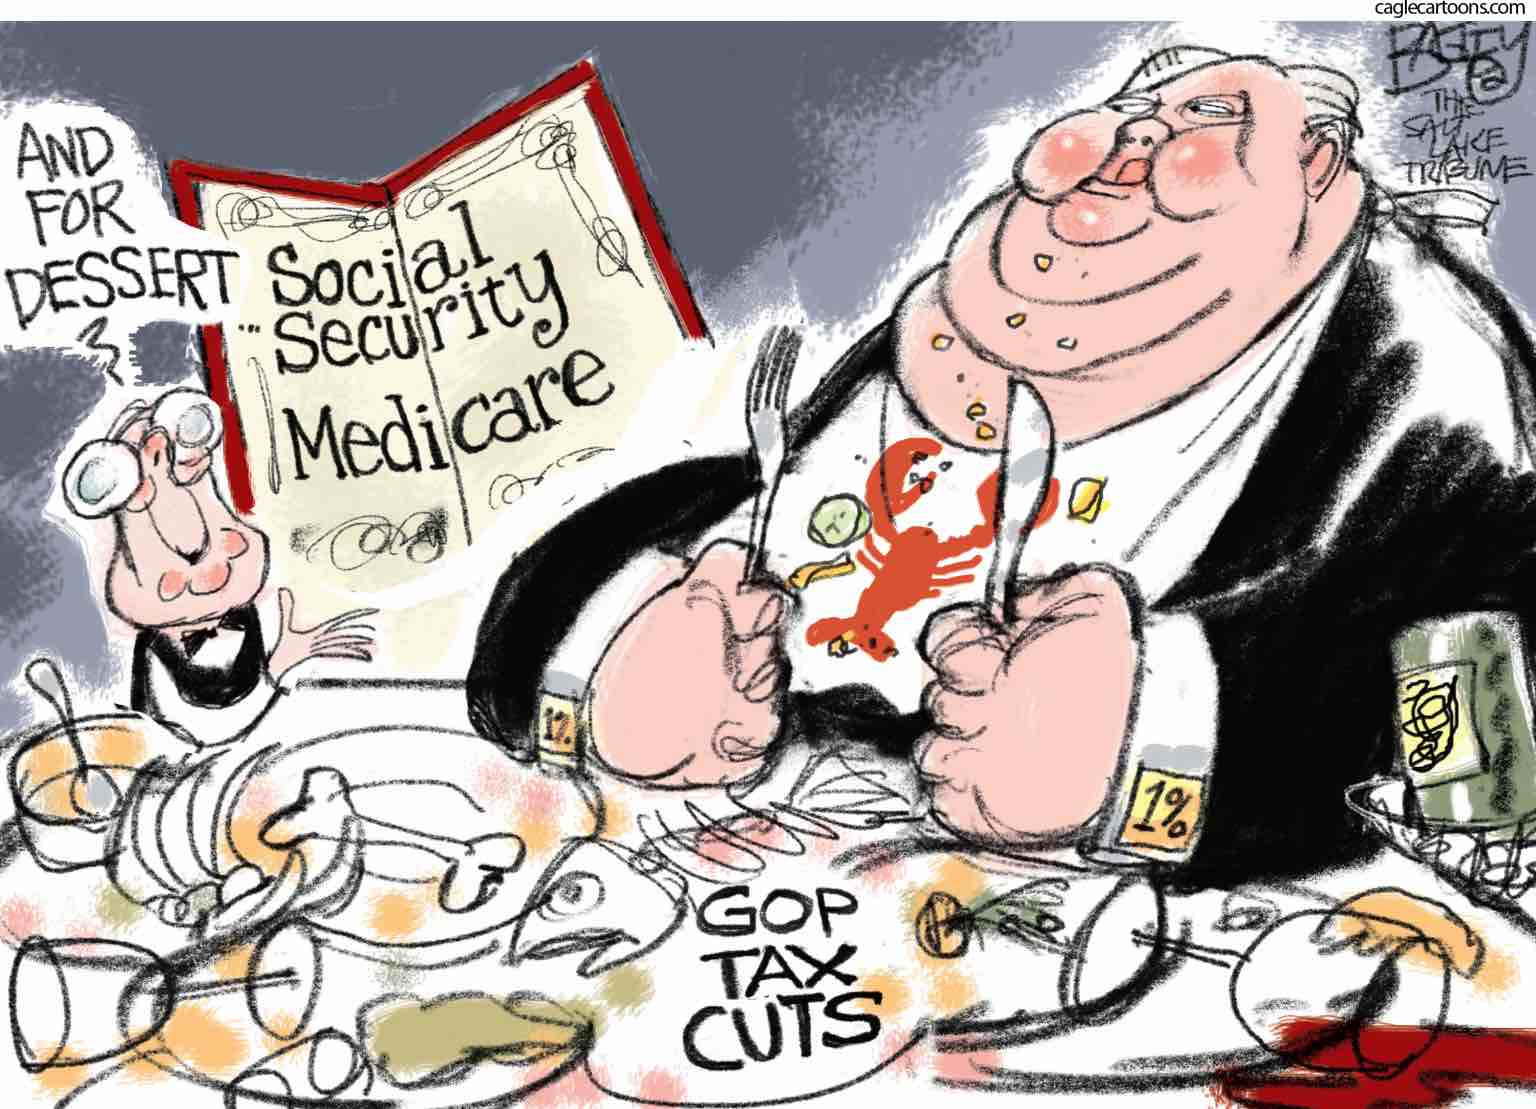 Republicans cut taxes for billionaire donors while threatening social security